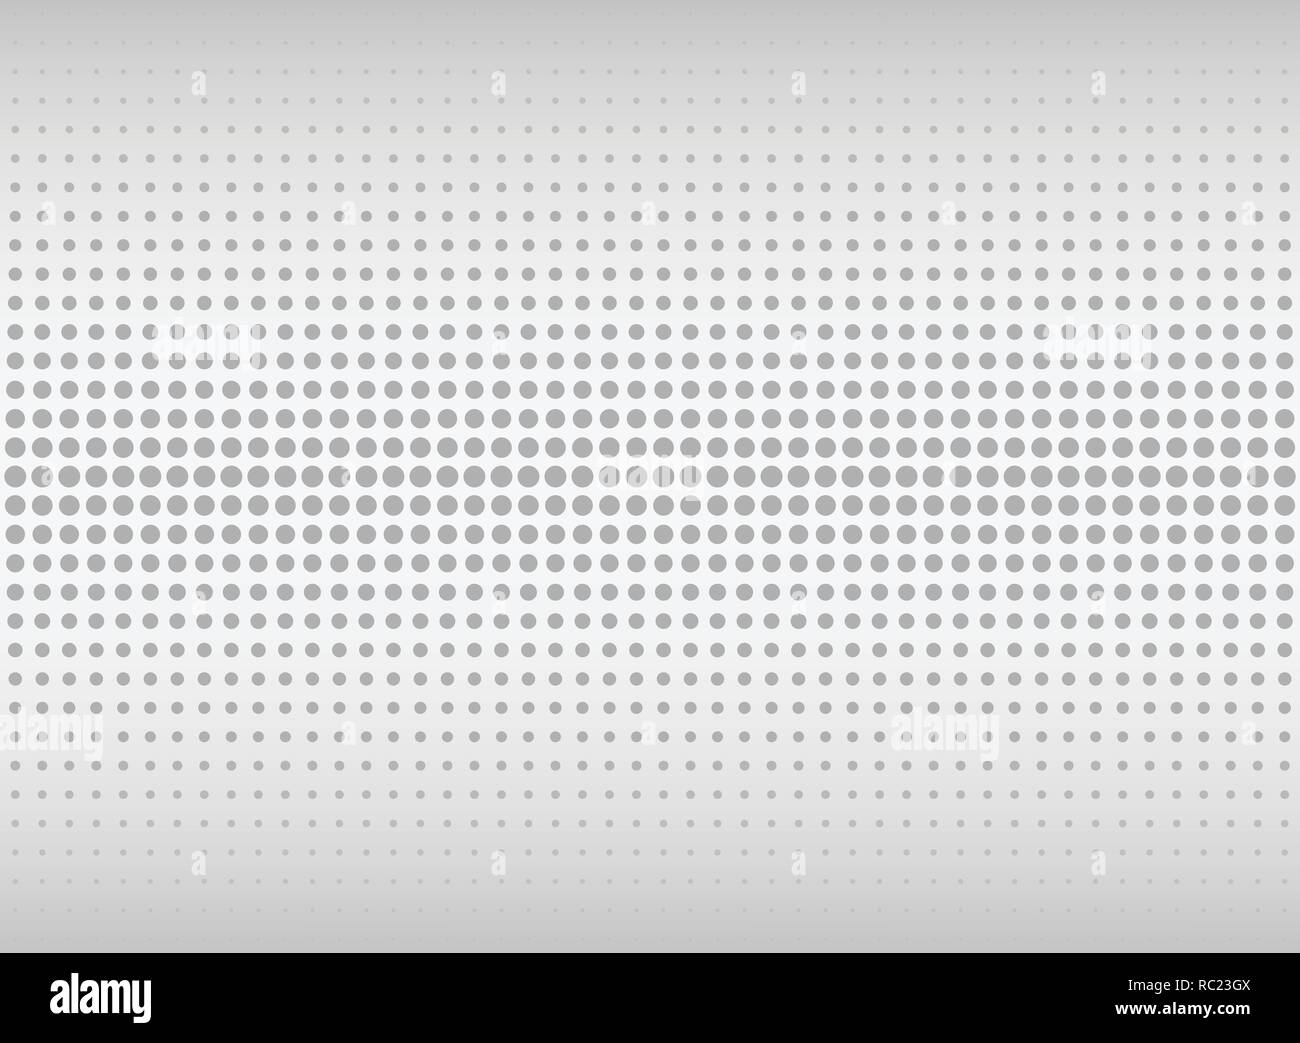 Abstract geometric gradient gray dot pattern background, vector eps10 ...